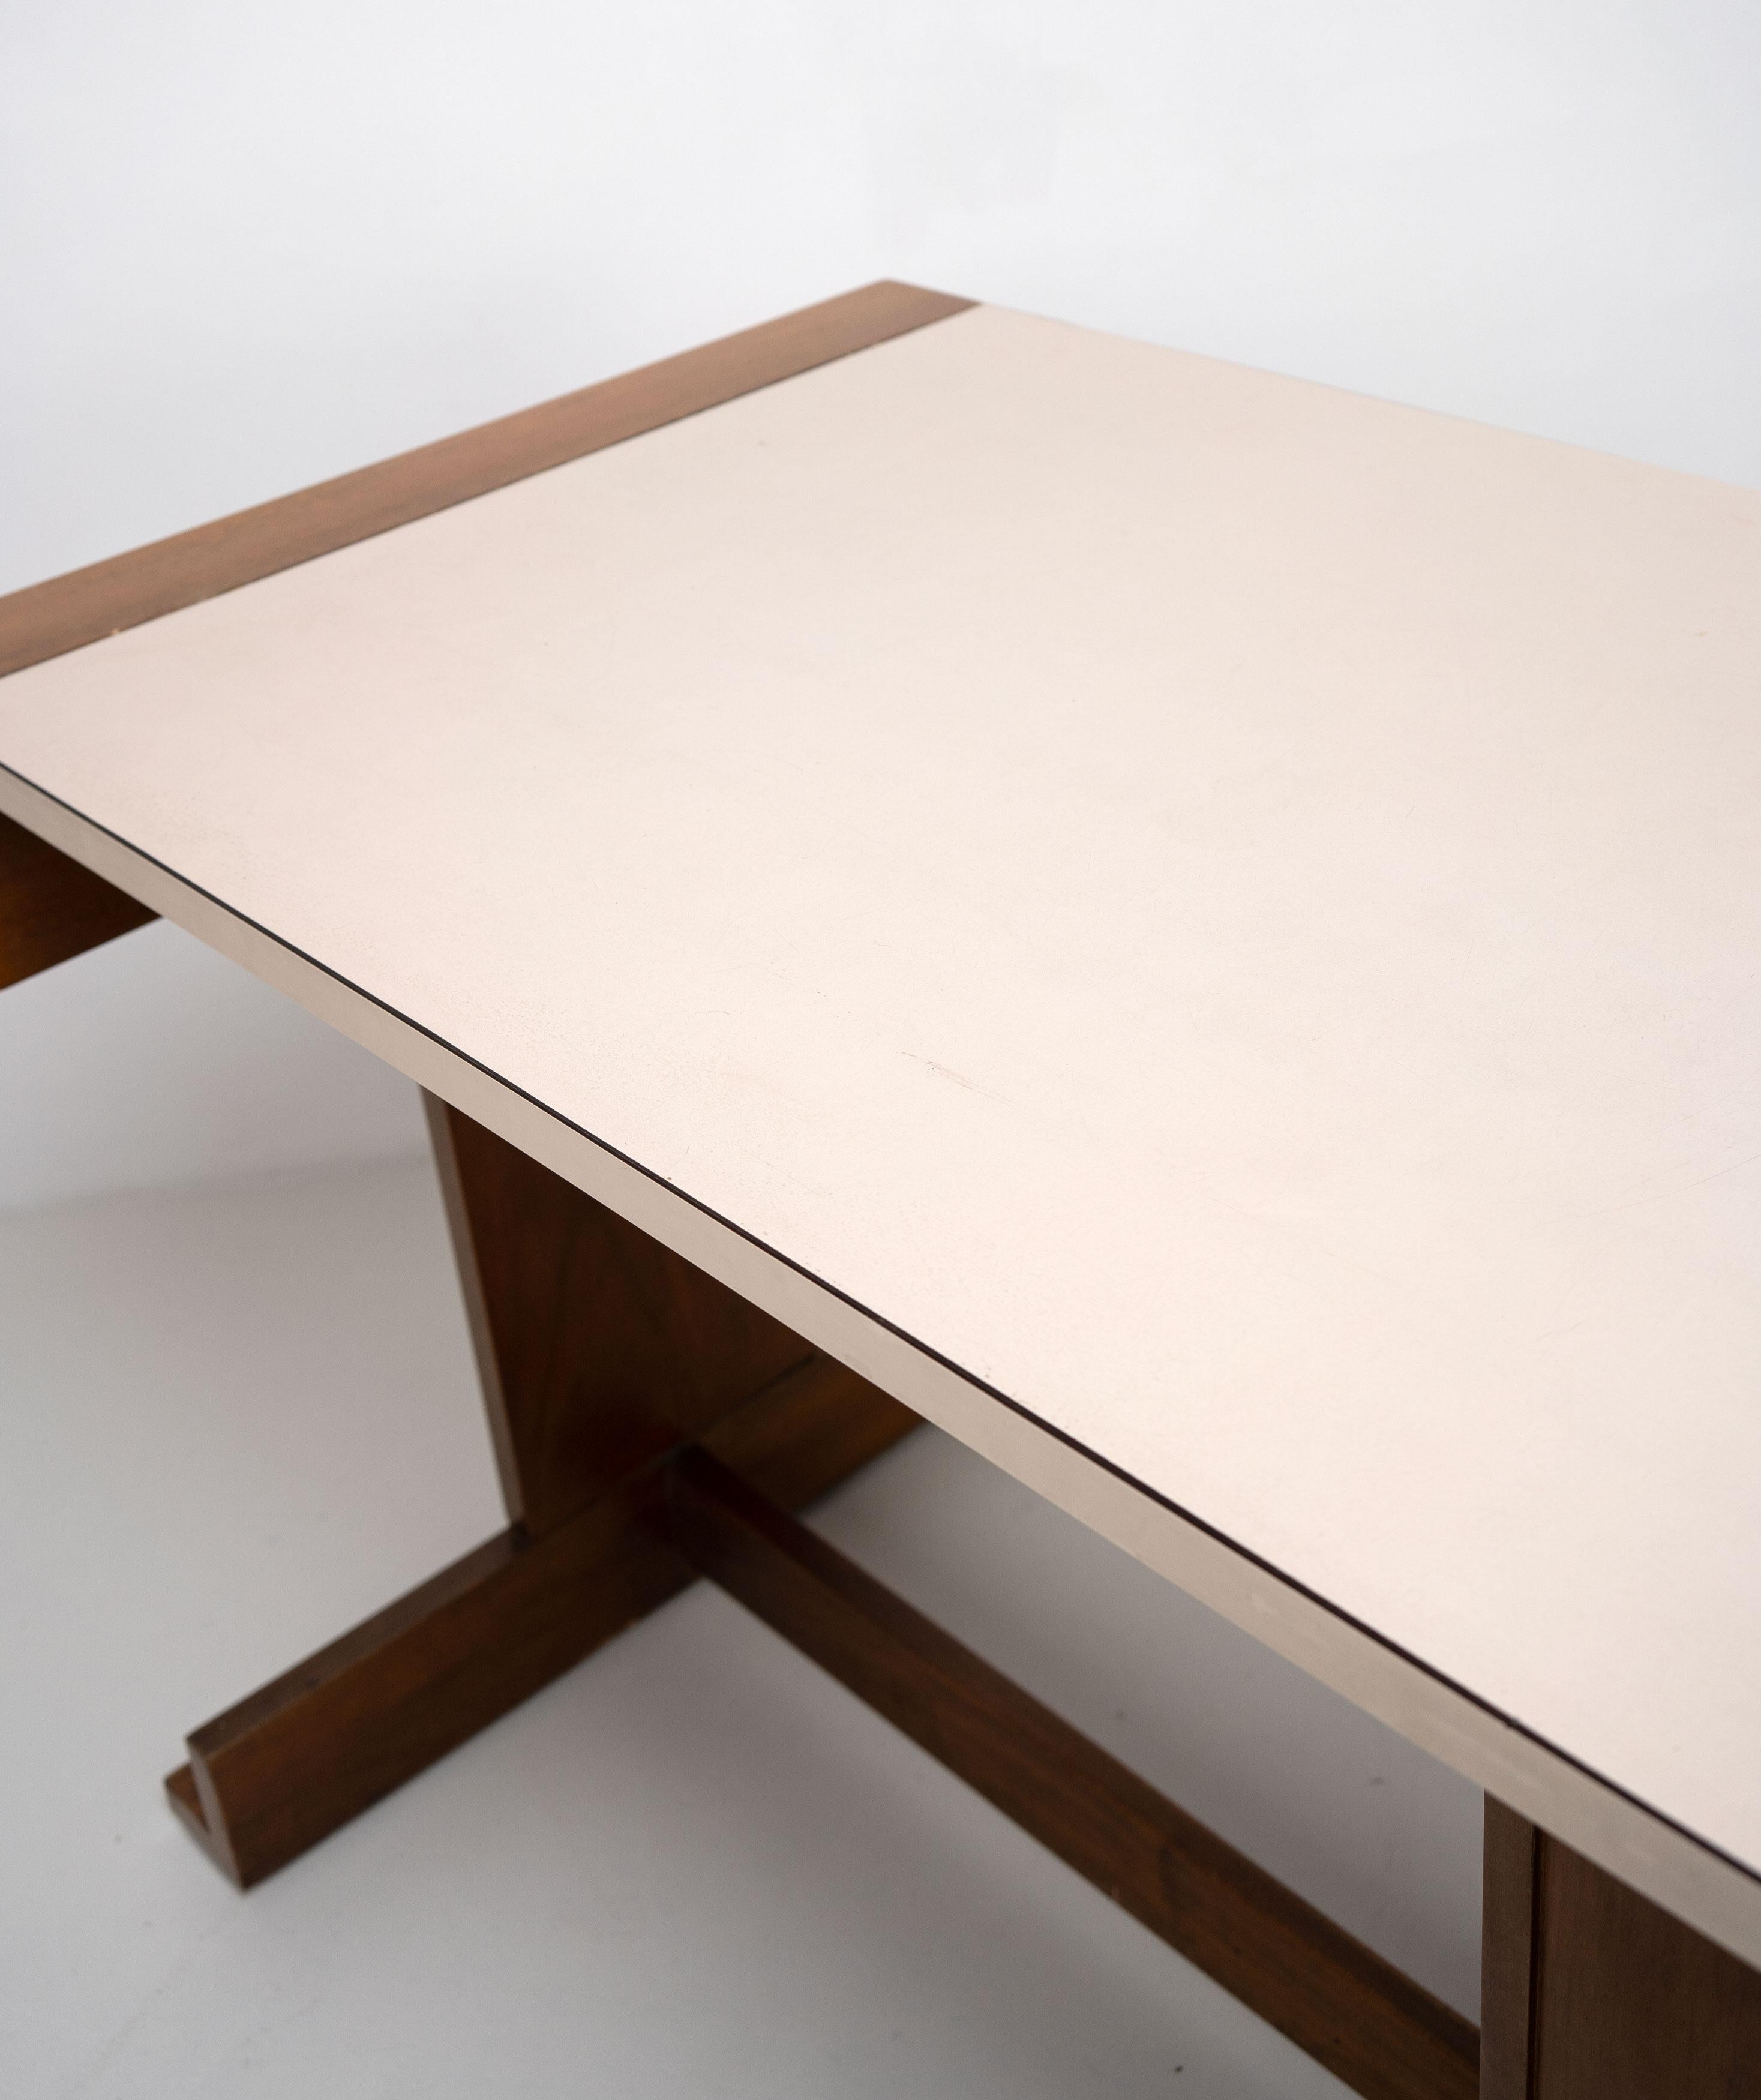 Constructivist Wood and Melamine Desk, Italy, c.1950 For Sale 5